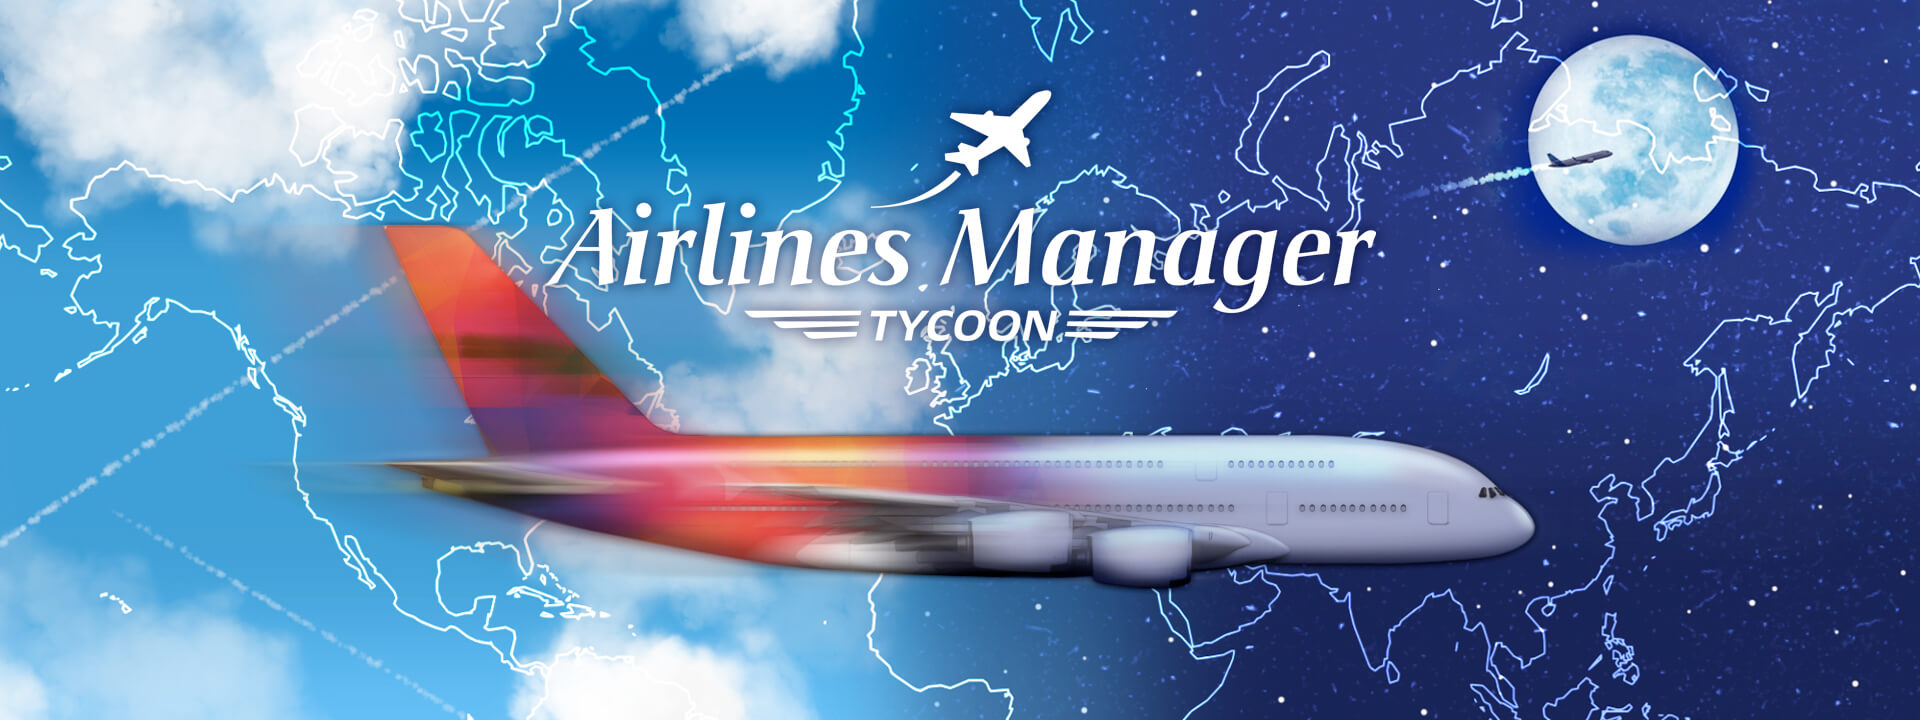 airline tycoon deluxe manage flights